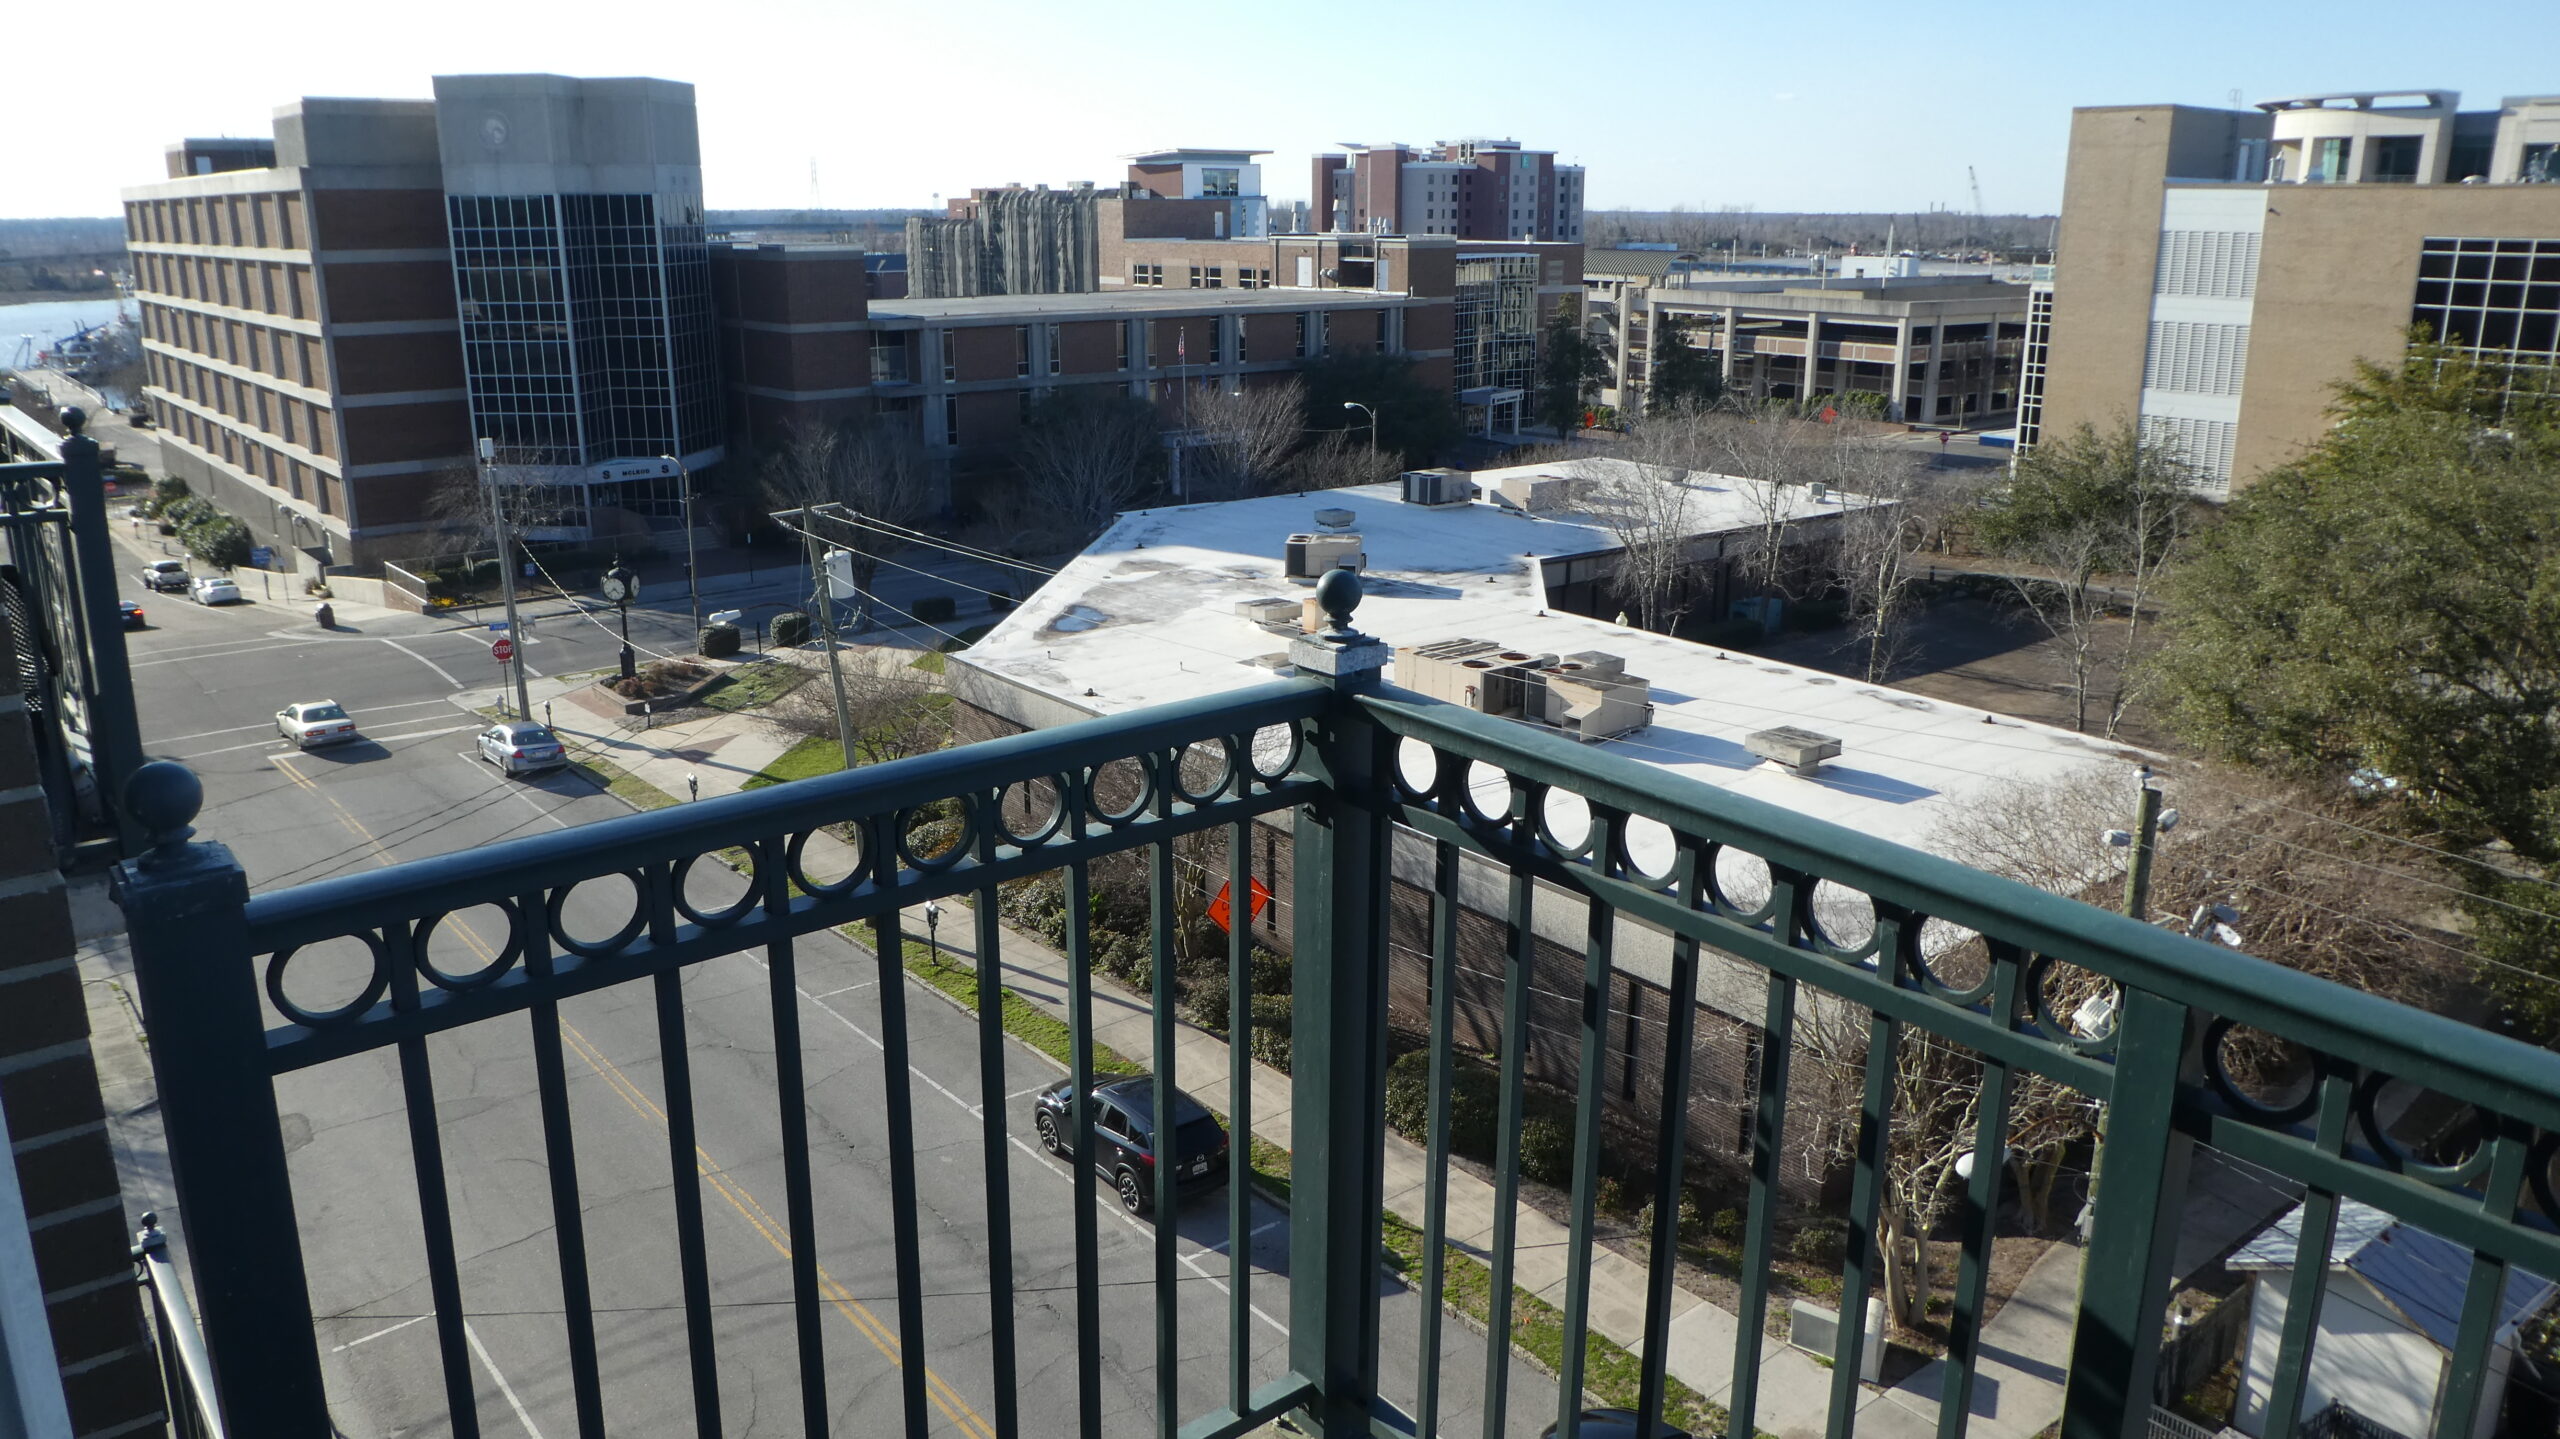 Photo shows the view northwest from a balcony at Bannerman Station